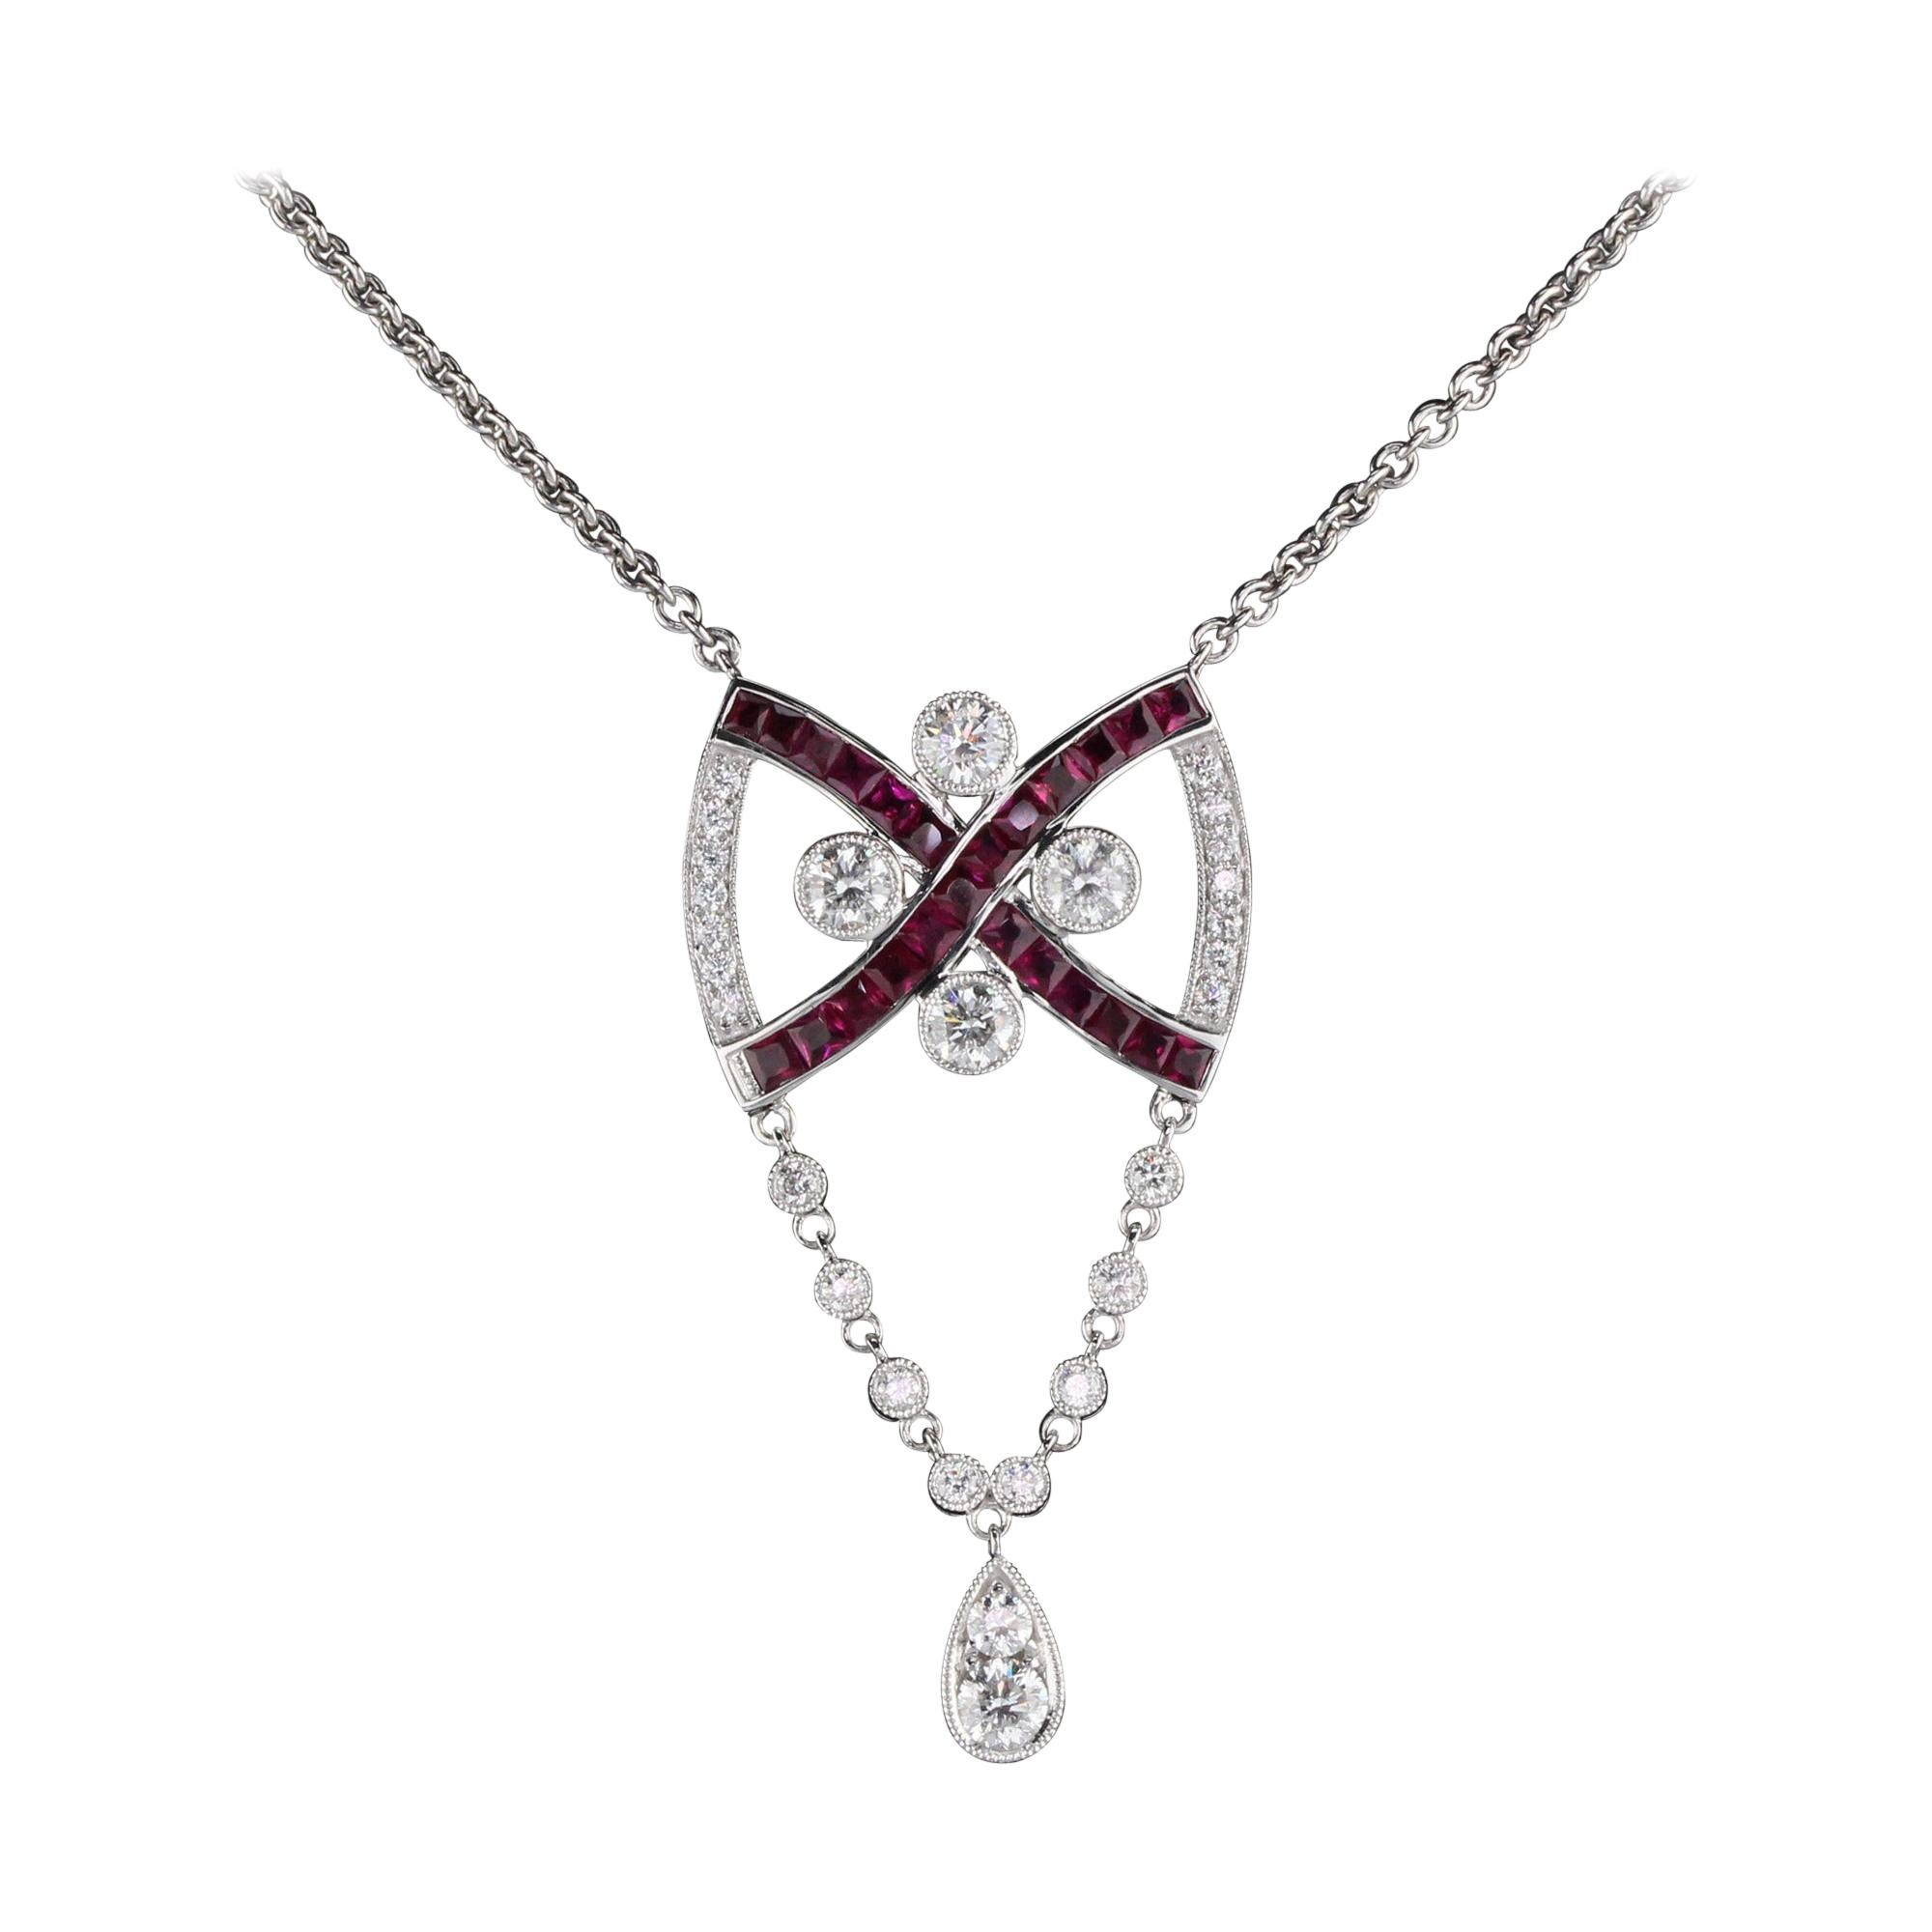 Vintage Estate 18 Karat White Gold Diamond and Ruby Necklace For Sale